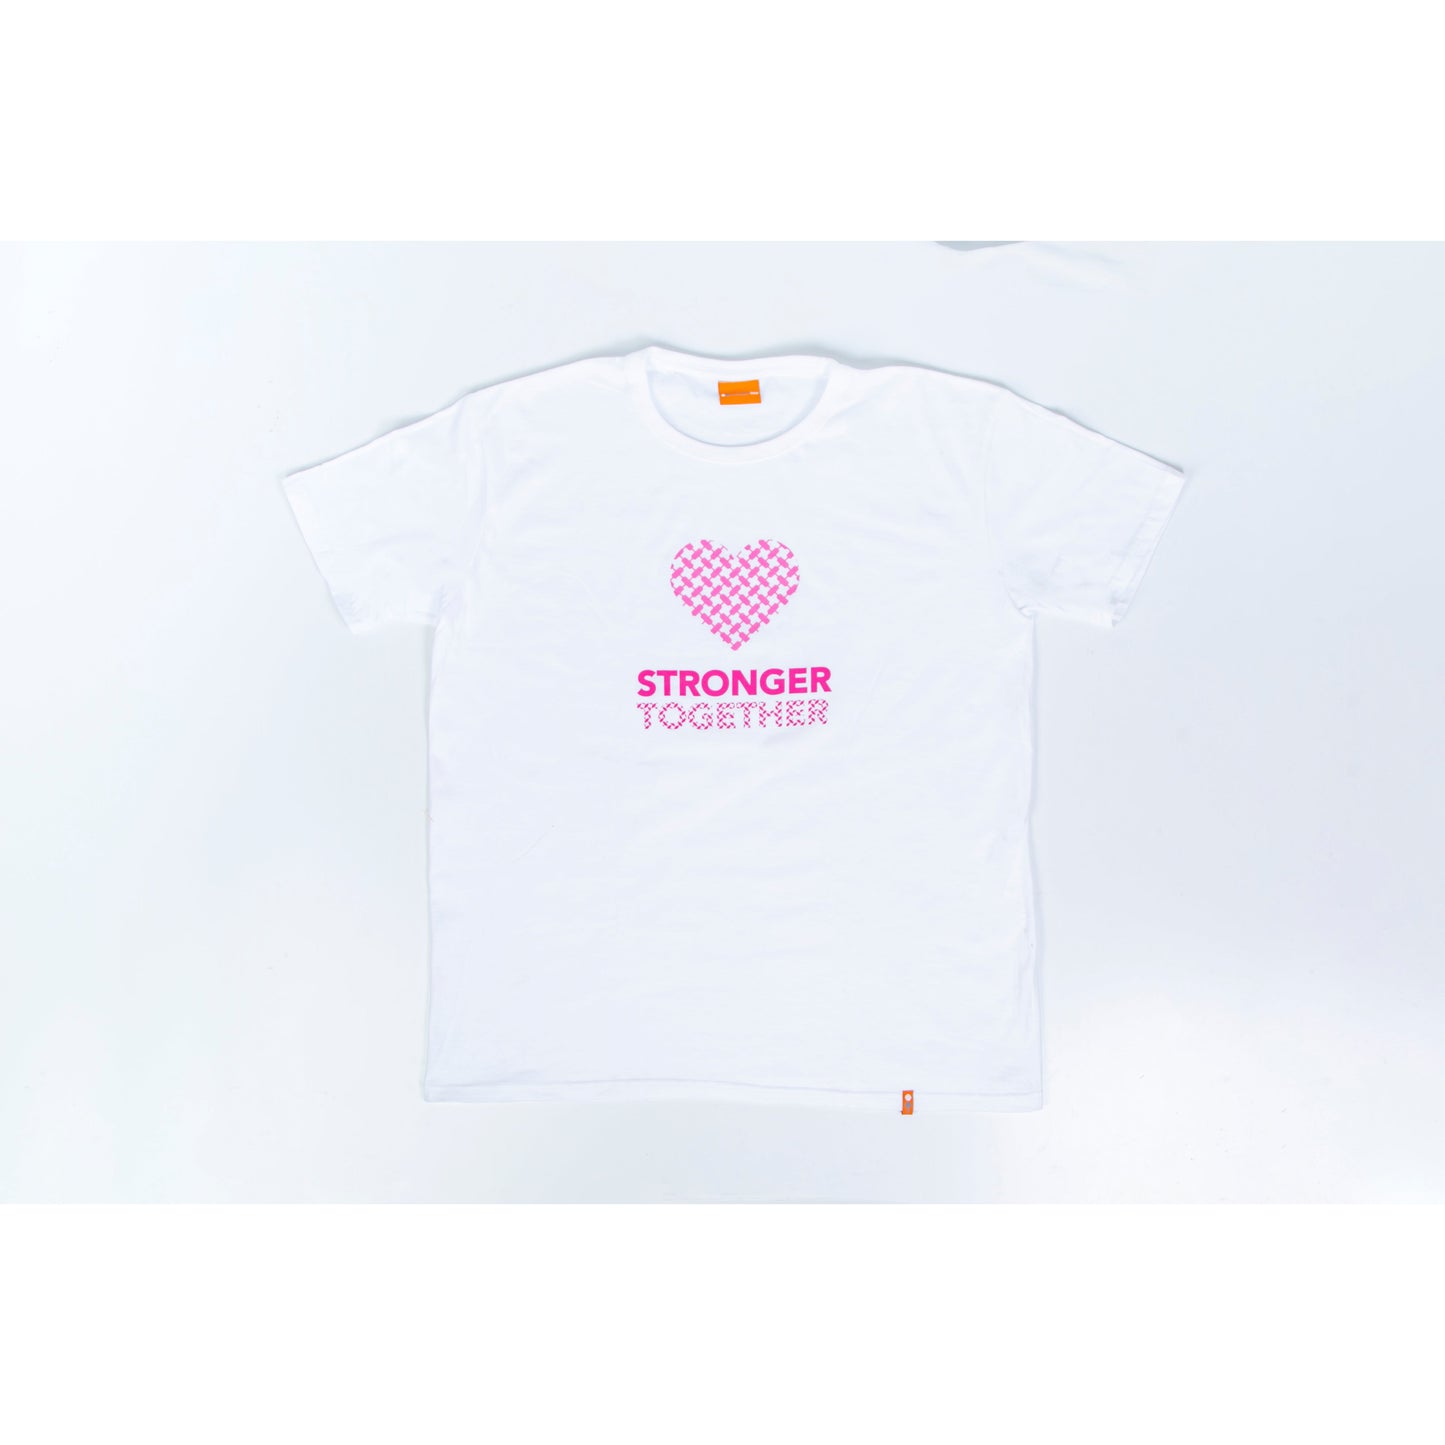 T-shirt in white color - Stronger together - Breast cancer